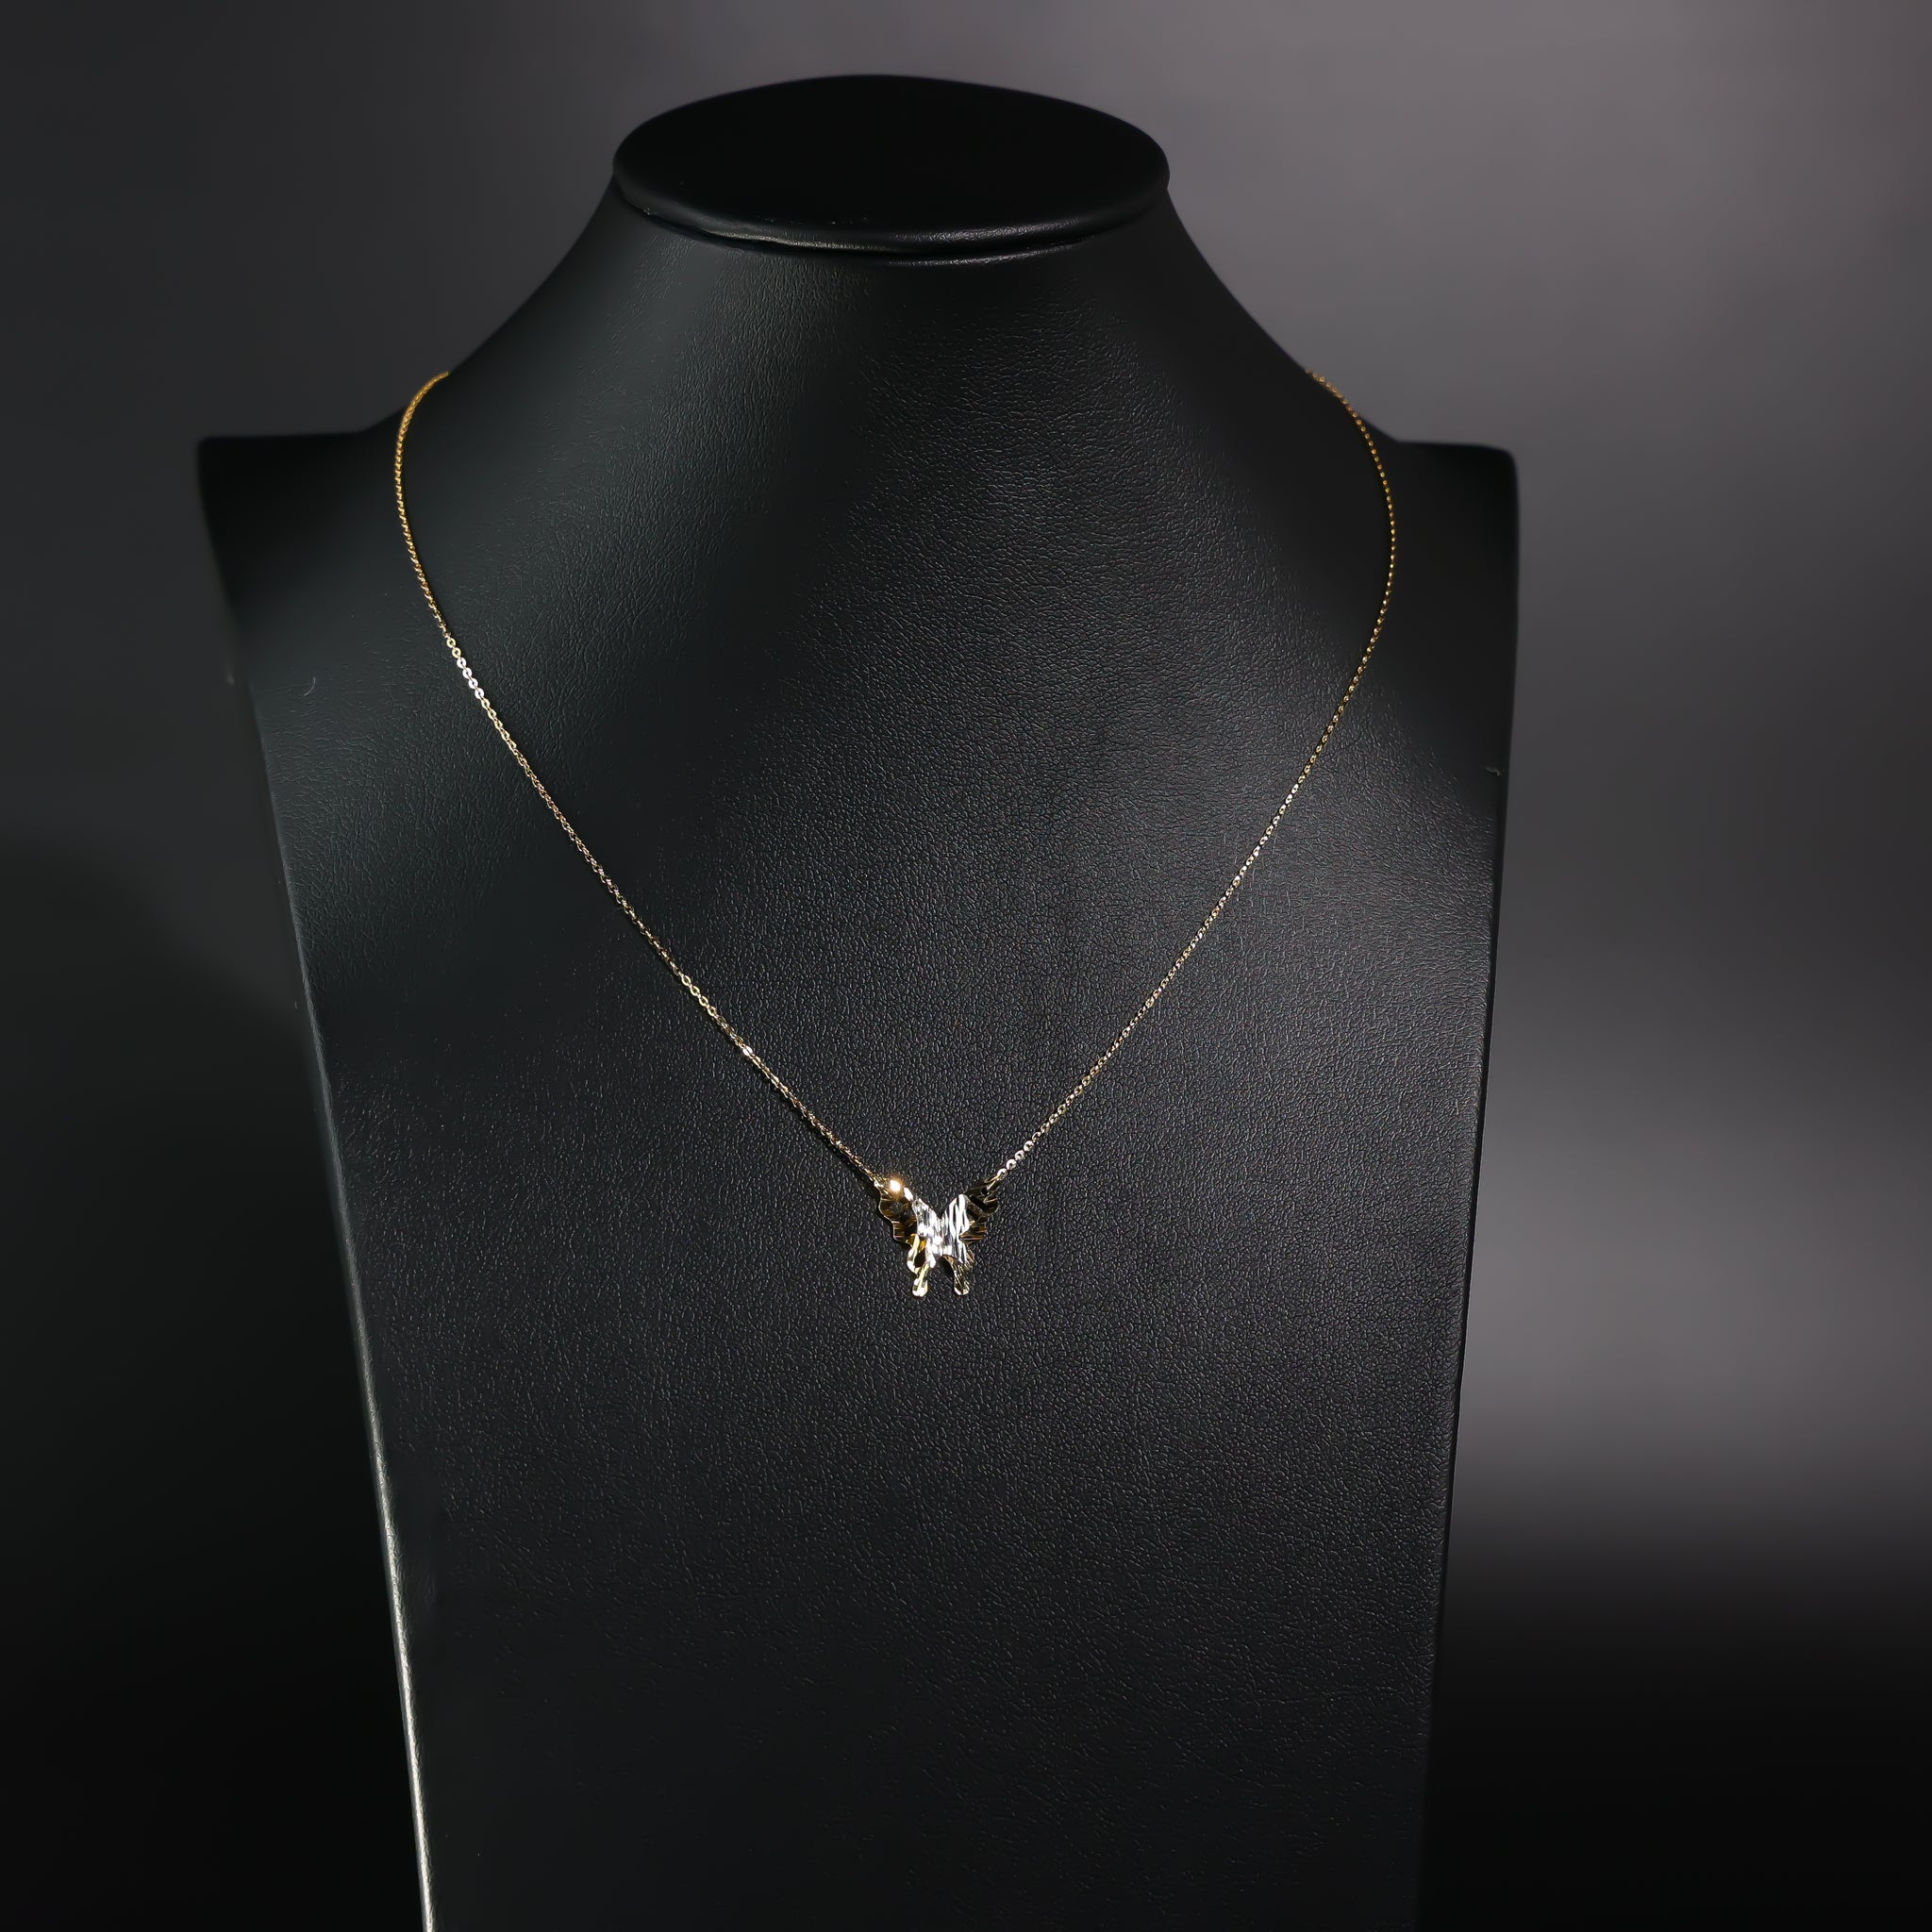 14K Gold Butterfly Necklace Model-NK0243 - Charlie & Co. Jewelry